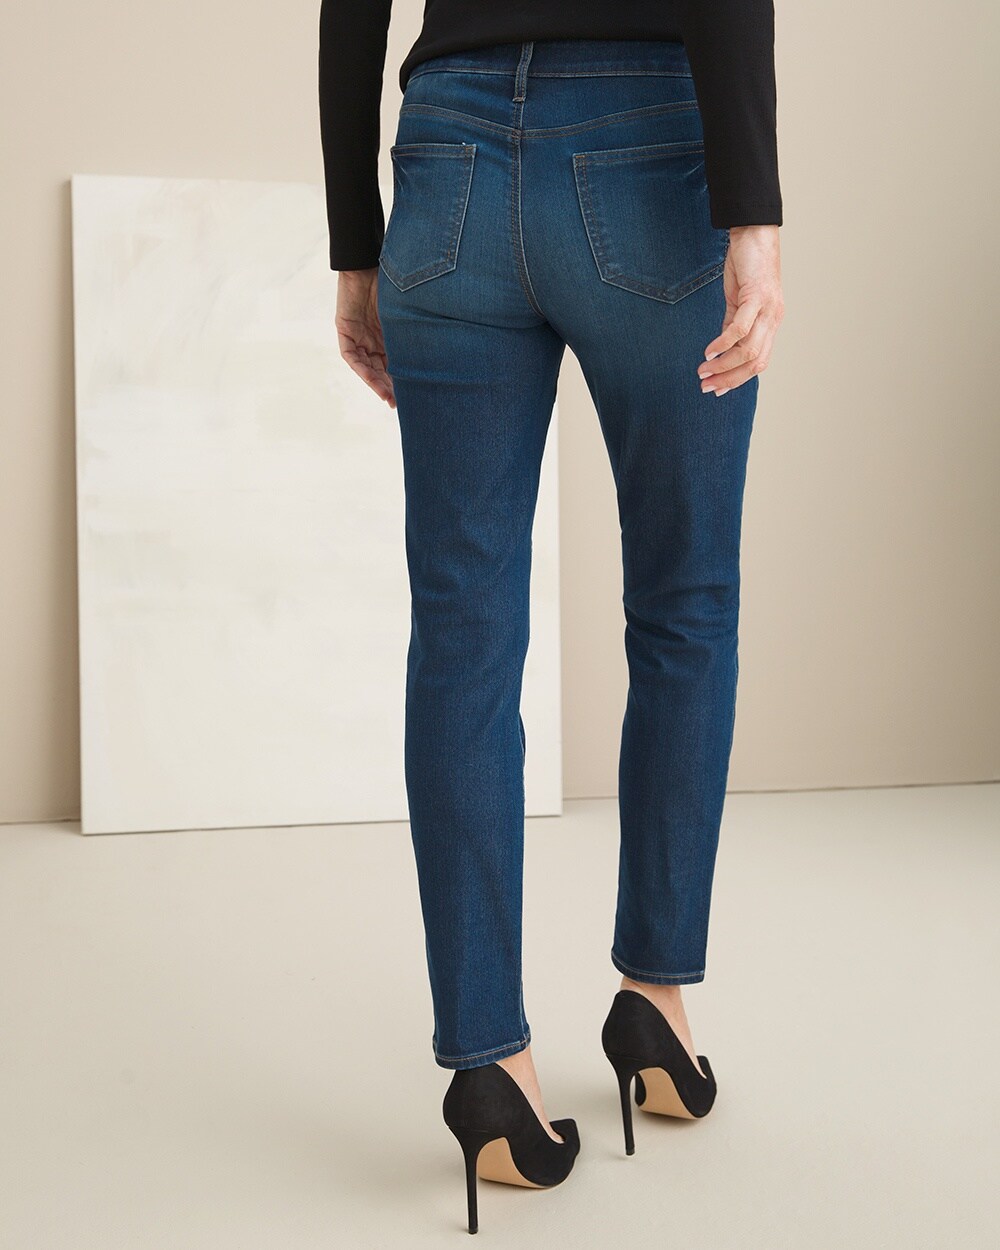 So Slimming Super Soft Girlfriend Ankle Jeans - Chico's